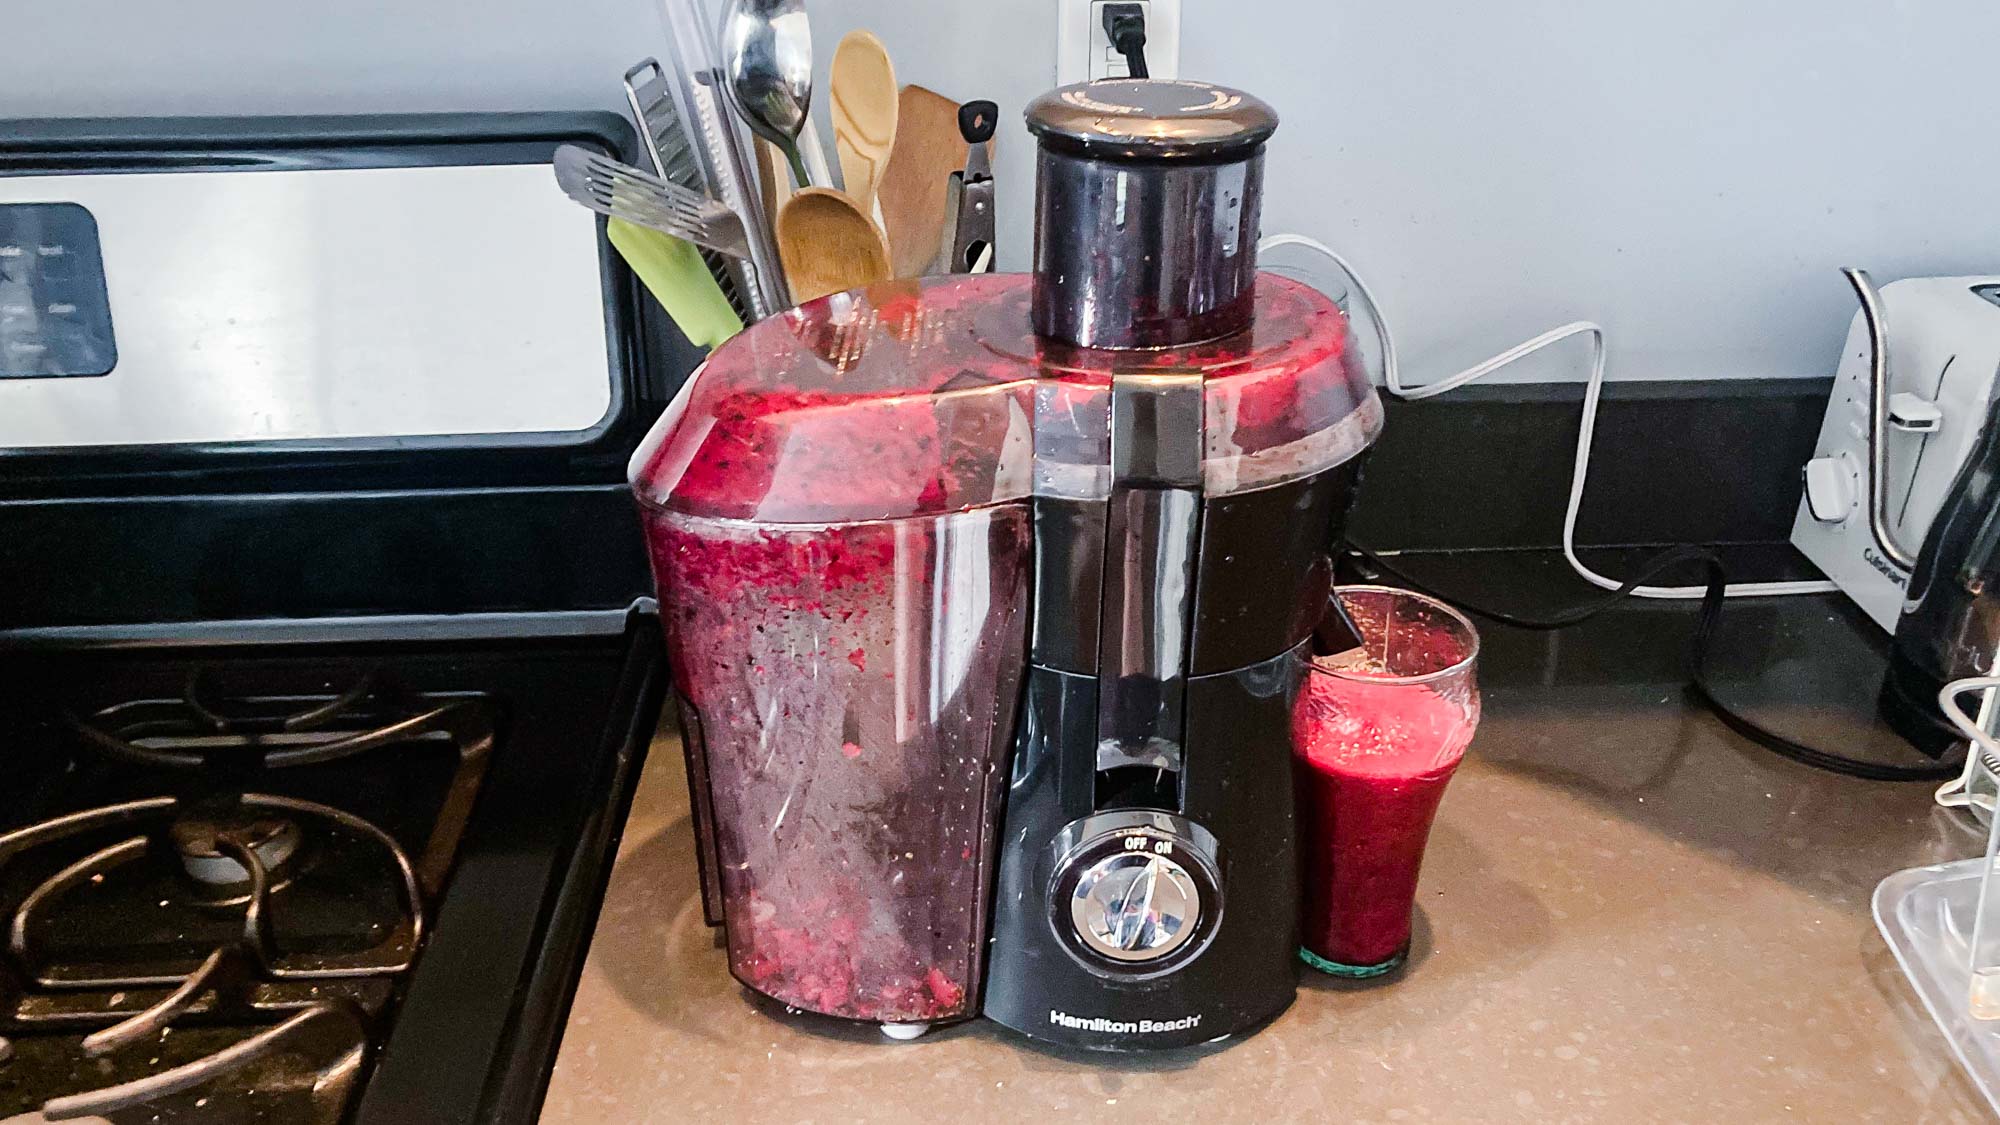 Hamilton Beach Big Mouth Juice Extractor on kitchen counter